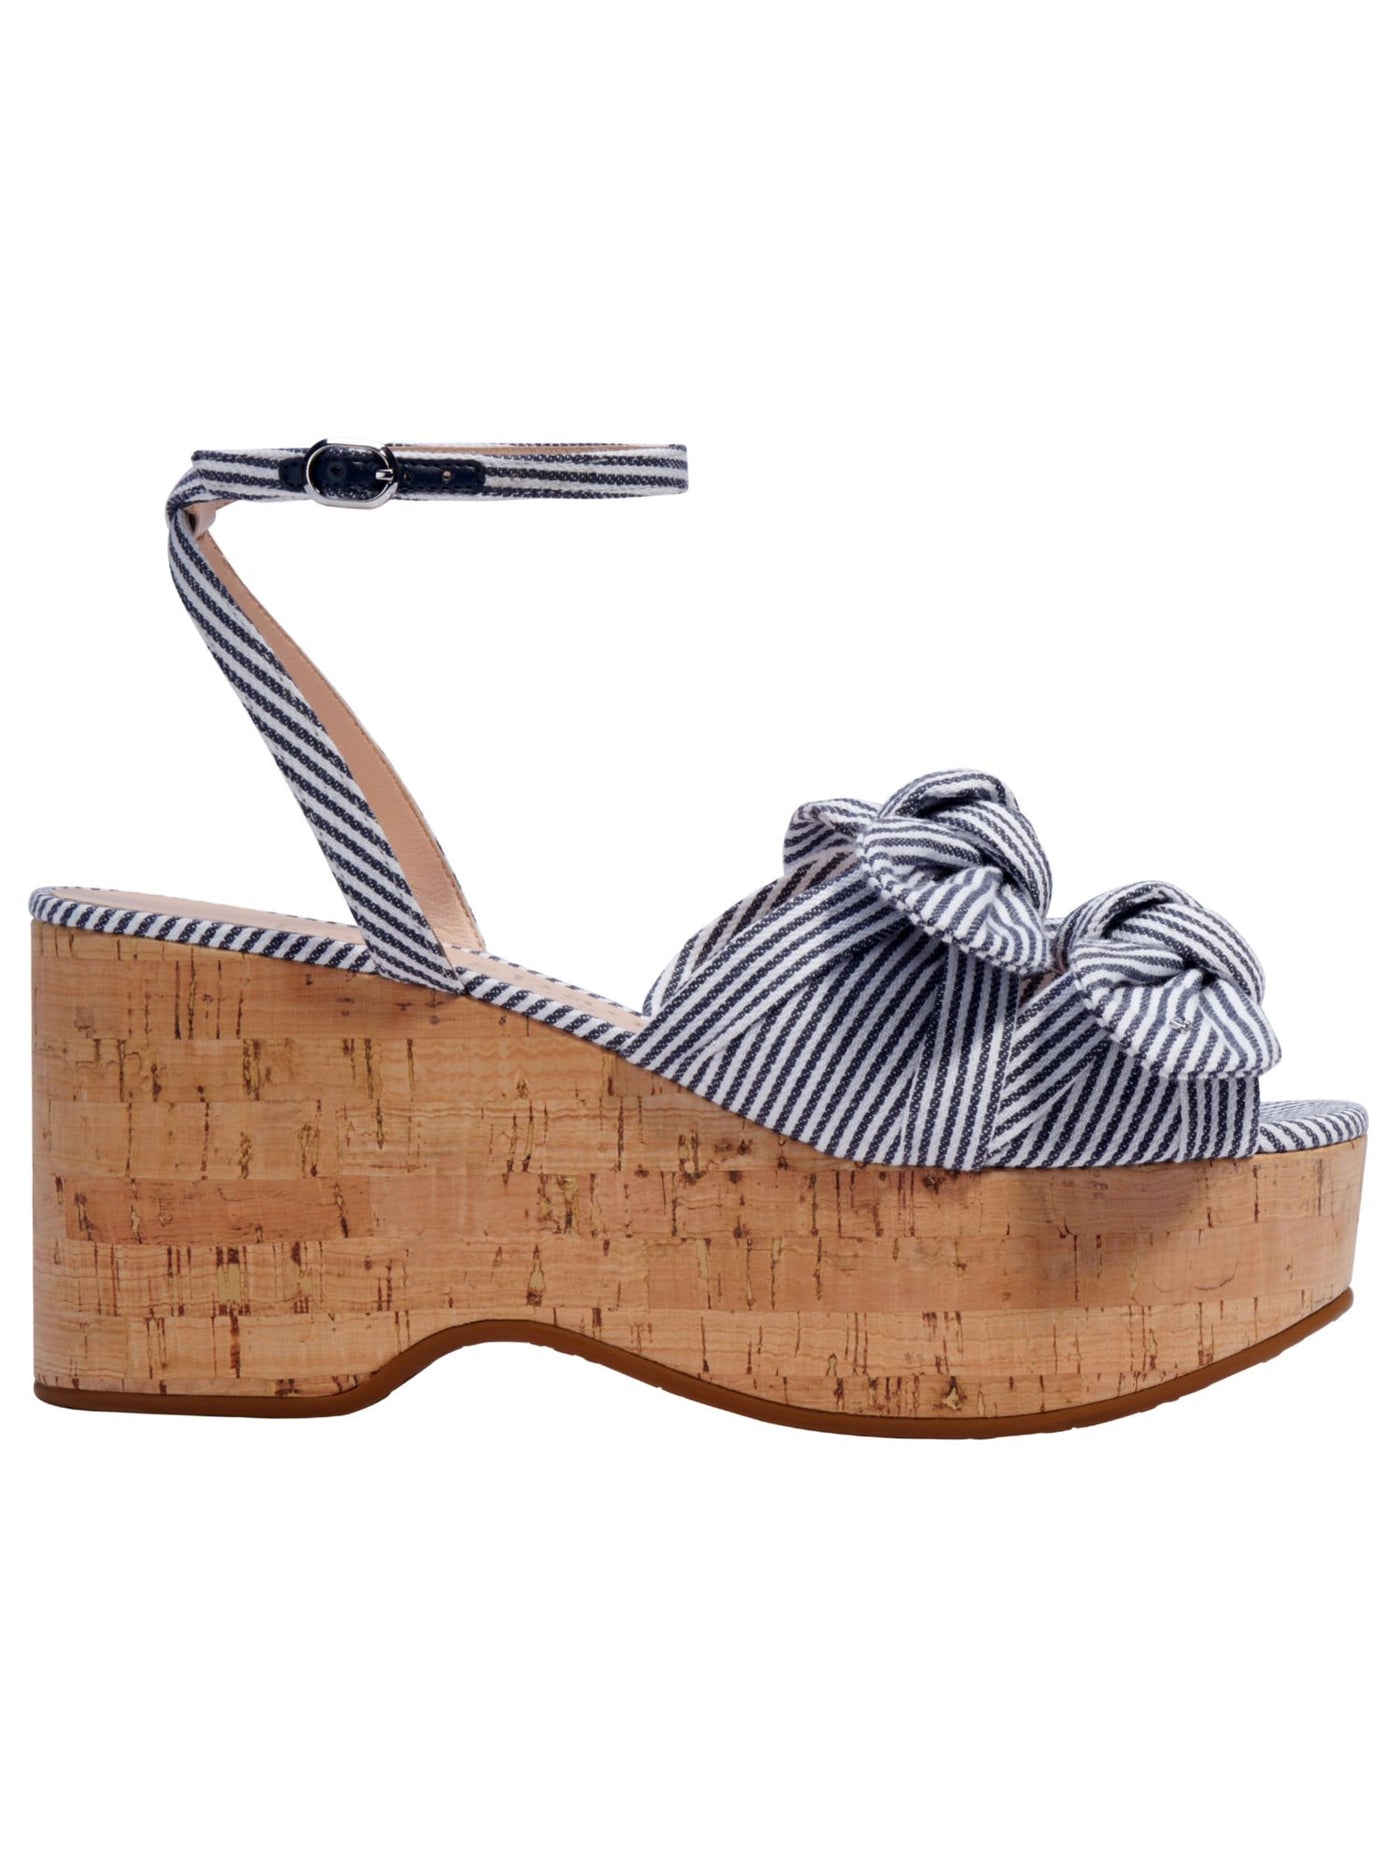 KATE SPADE NEW YORK Womens Navy Striped Adjustable Strap Bow Accent Julep Round Toe Wedge Buckle Slingback Sandal 6.5 B